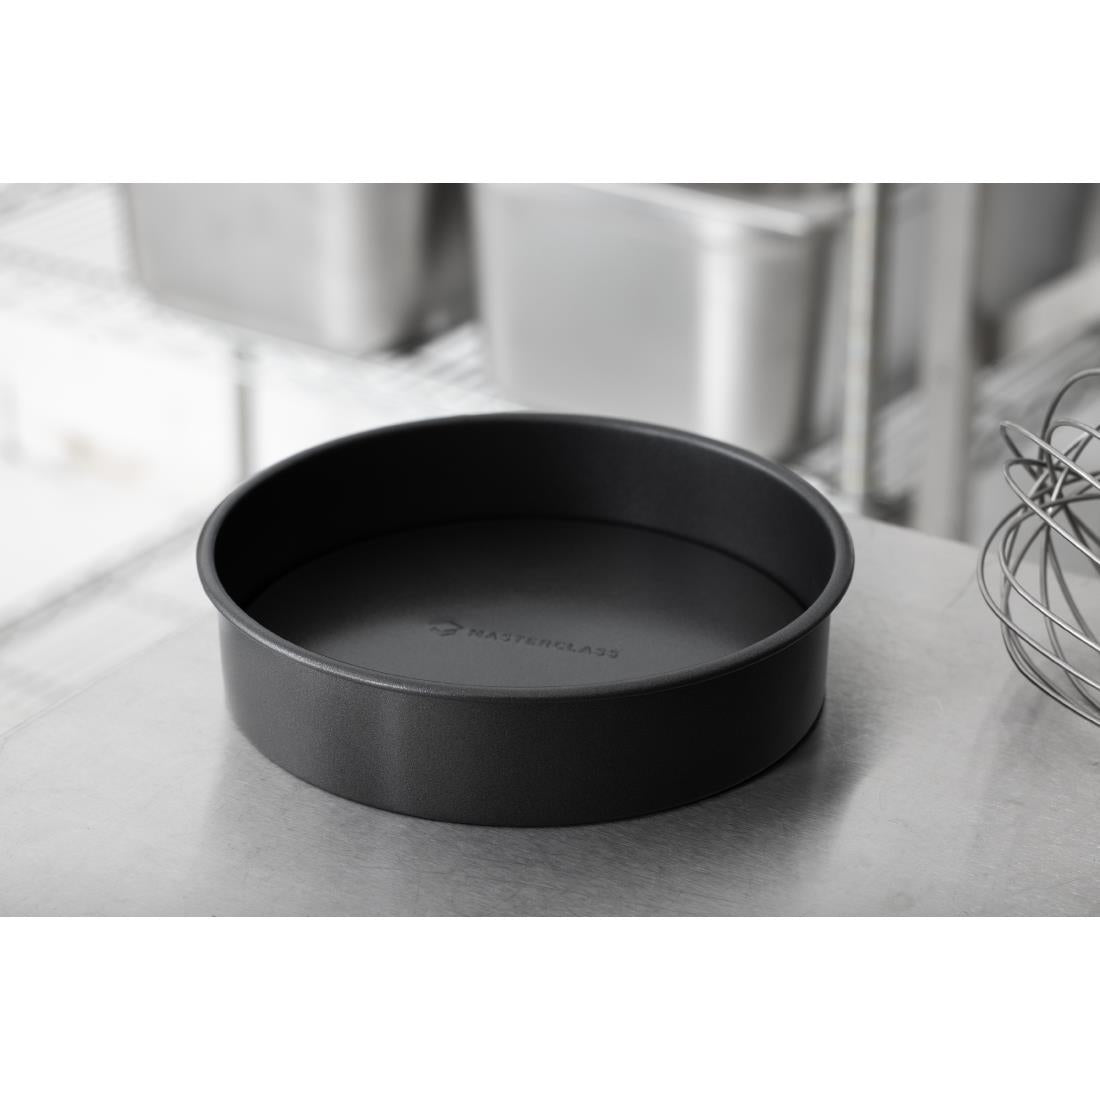 FC357 Masterclass Non-Stick Loose Base Round Sandwich Pan 180mm JD Catering Equipment Solutions Ltd